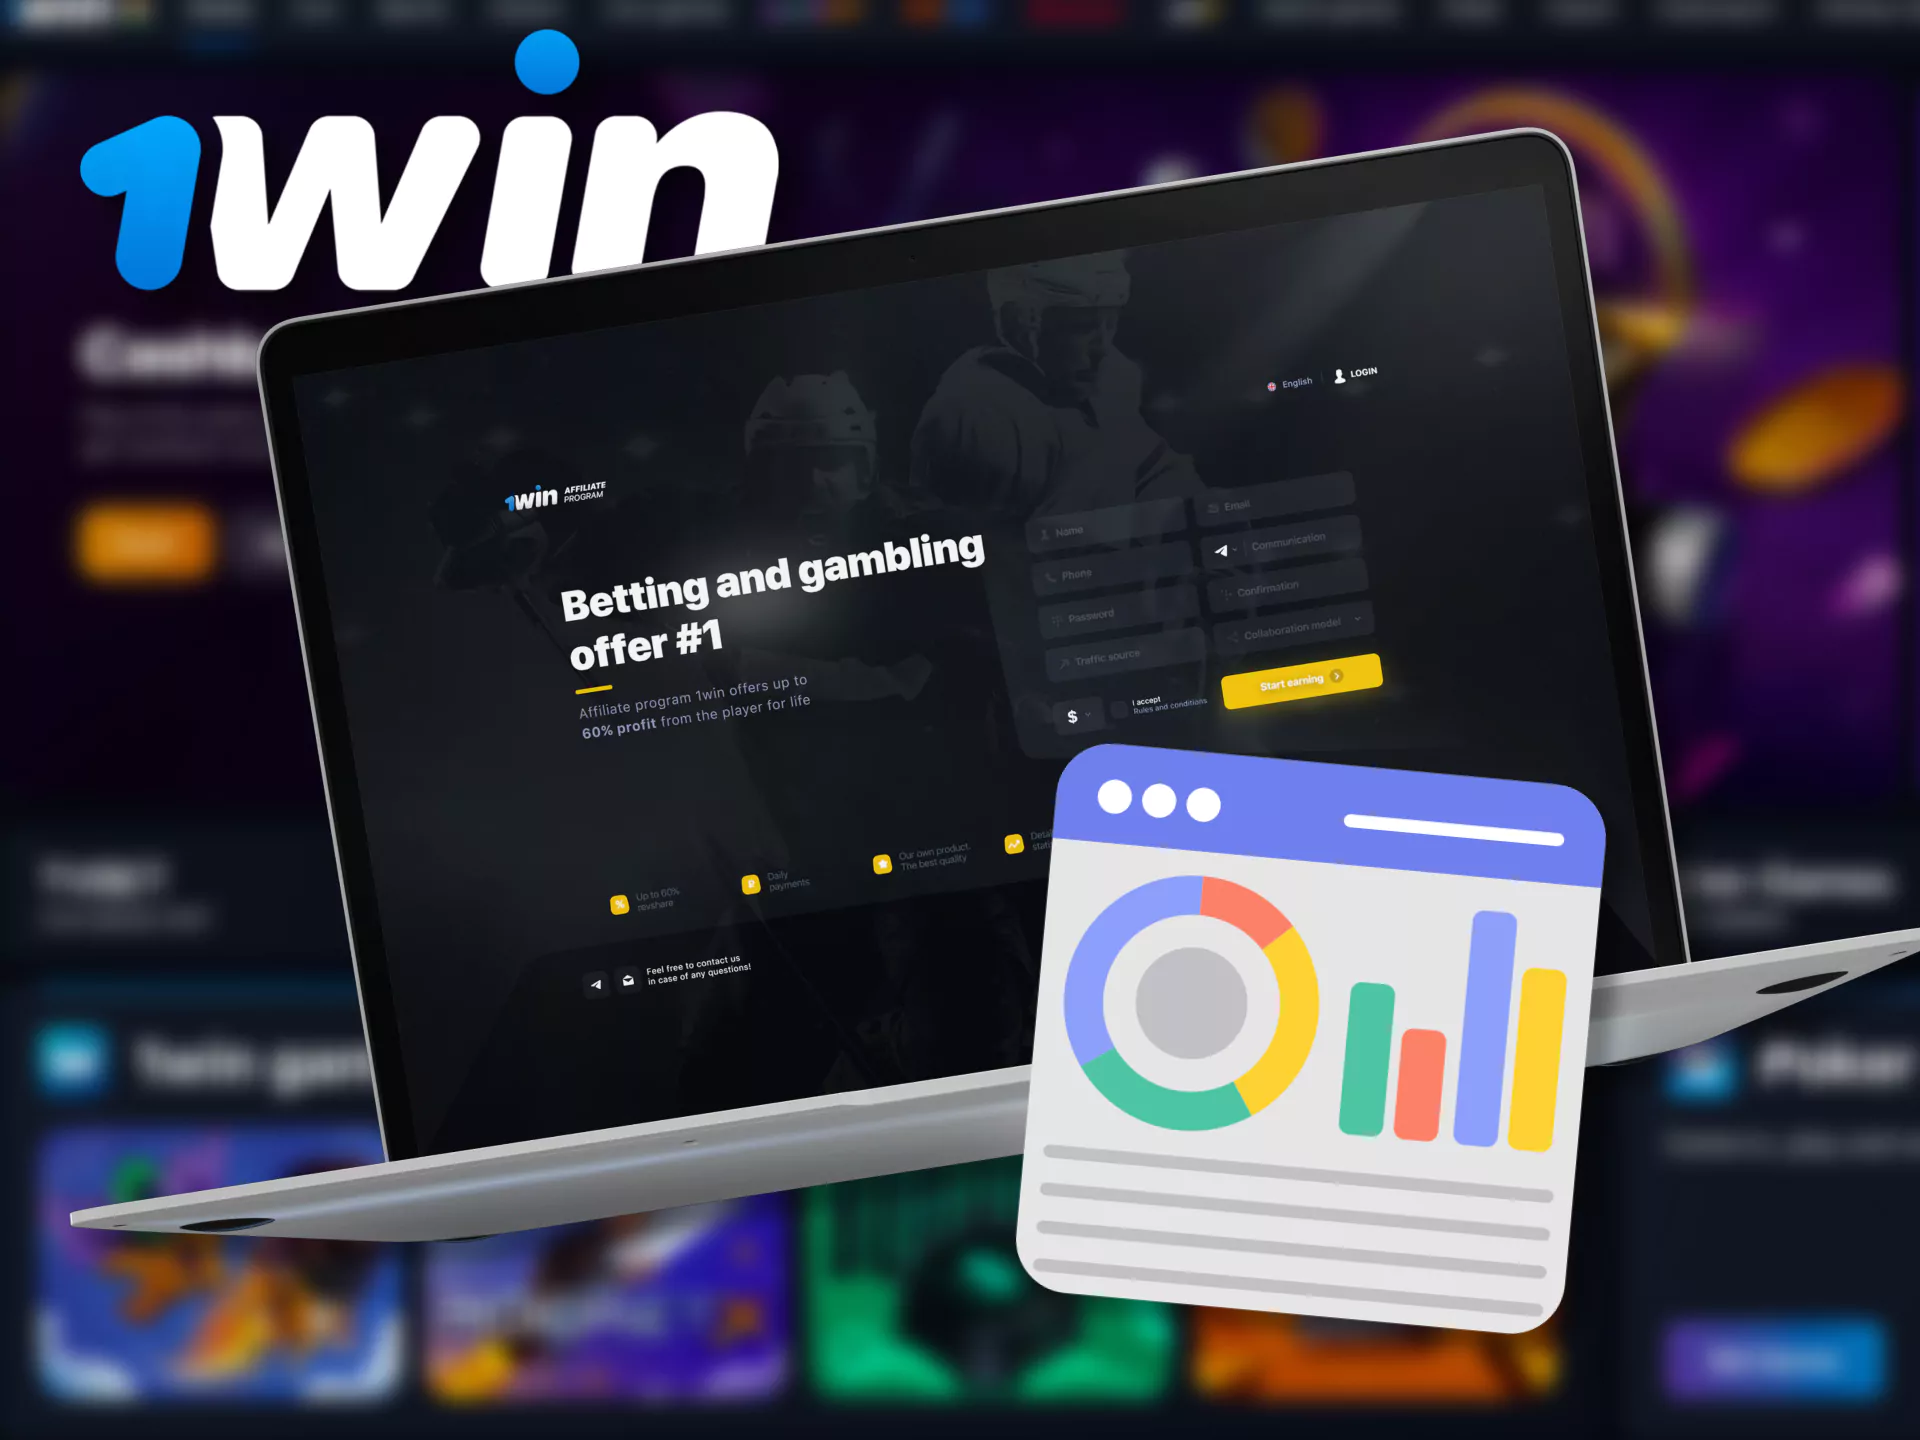 In the affiliate program from 1Win, users have access to a variety of dashboards.